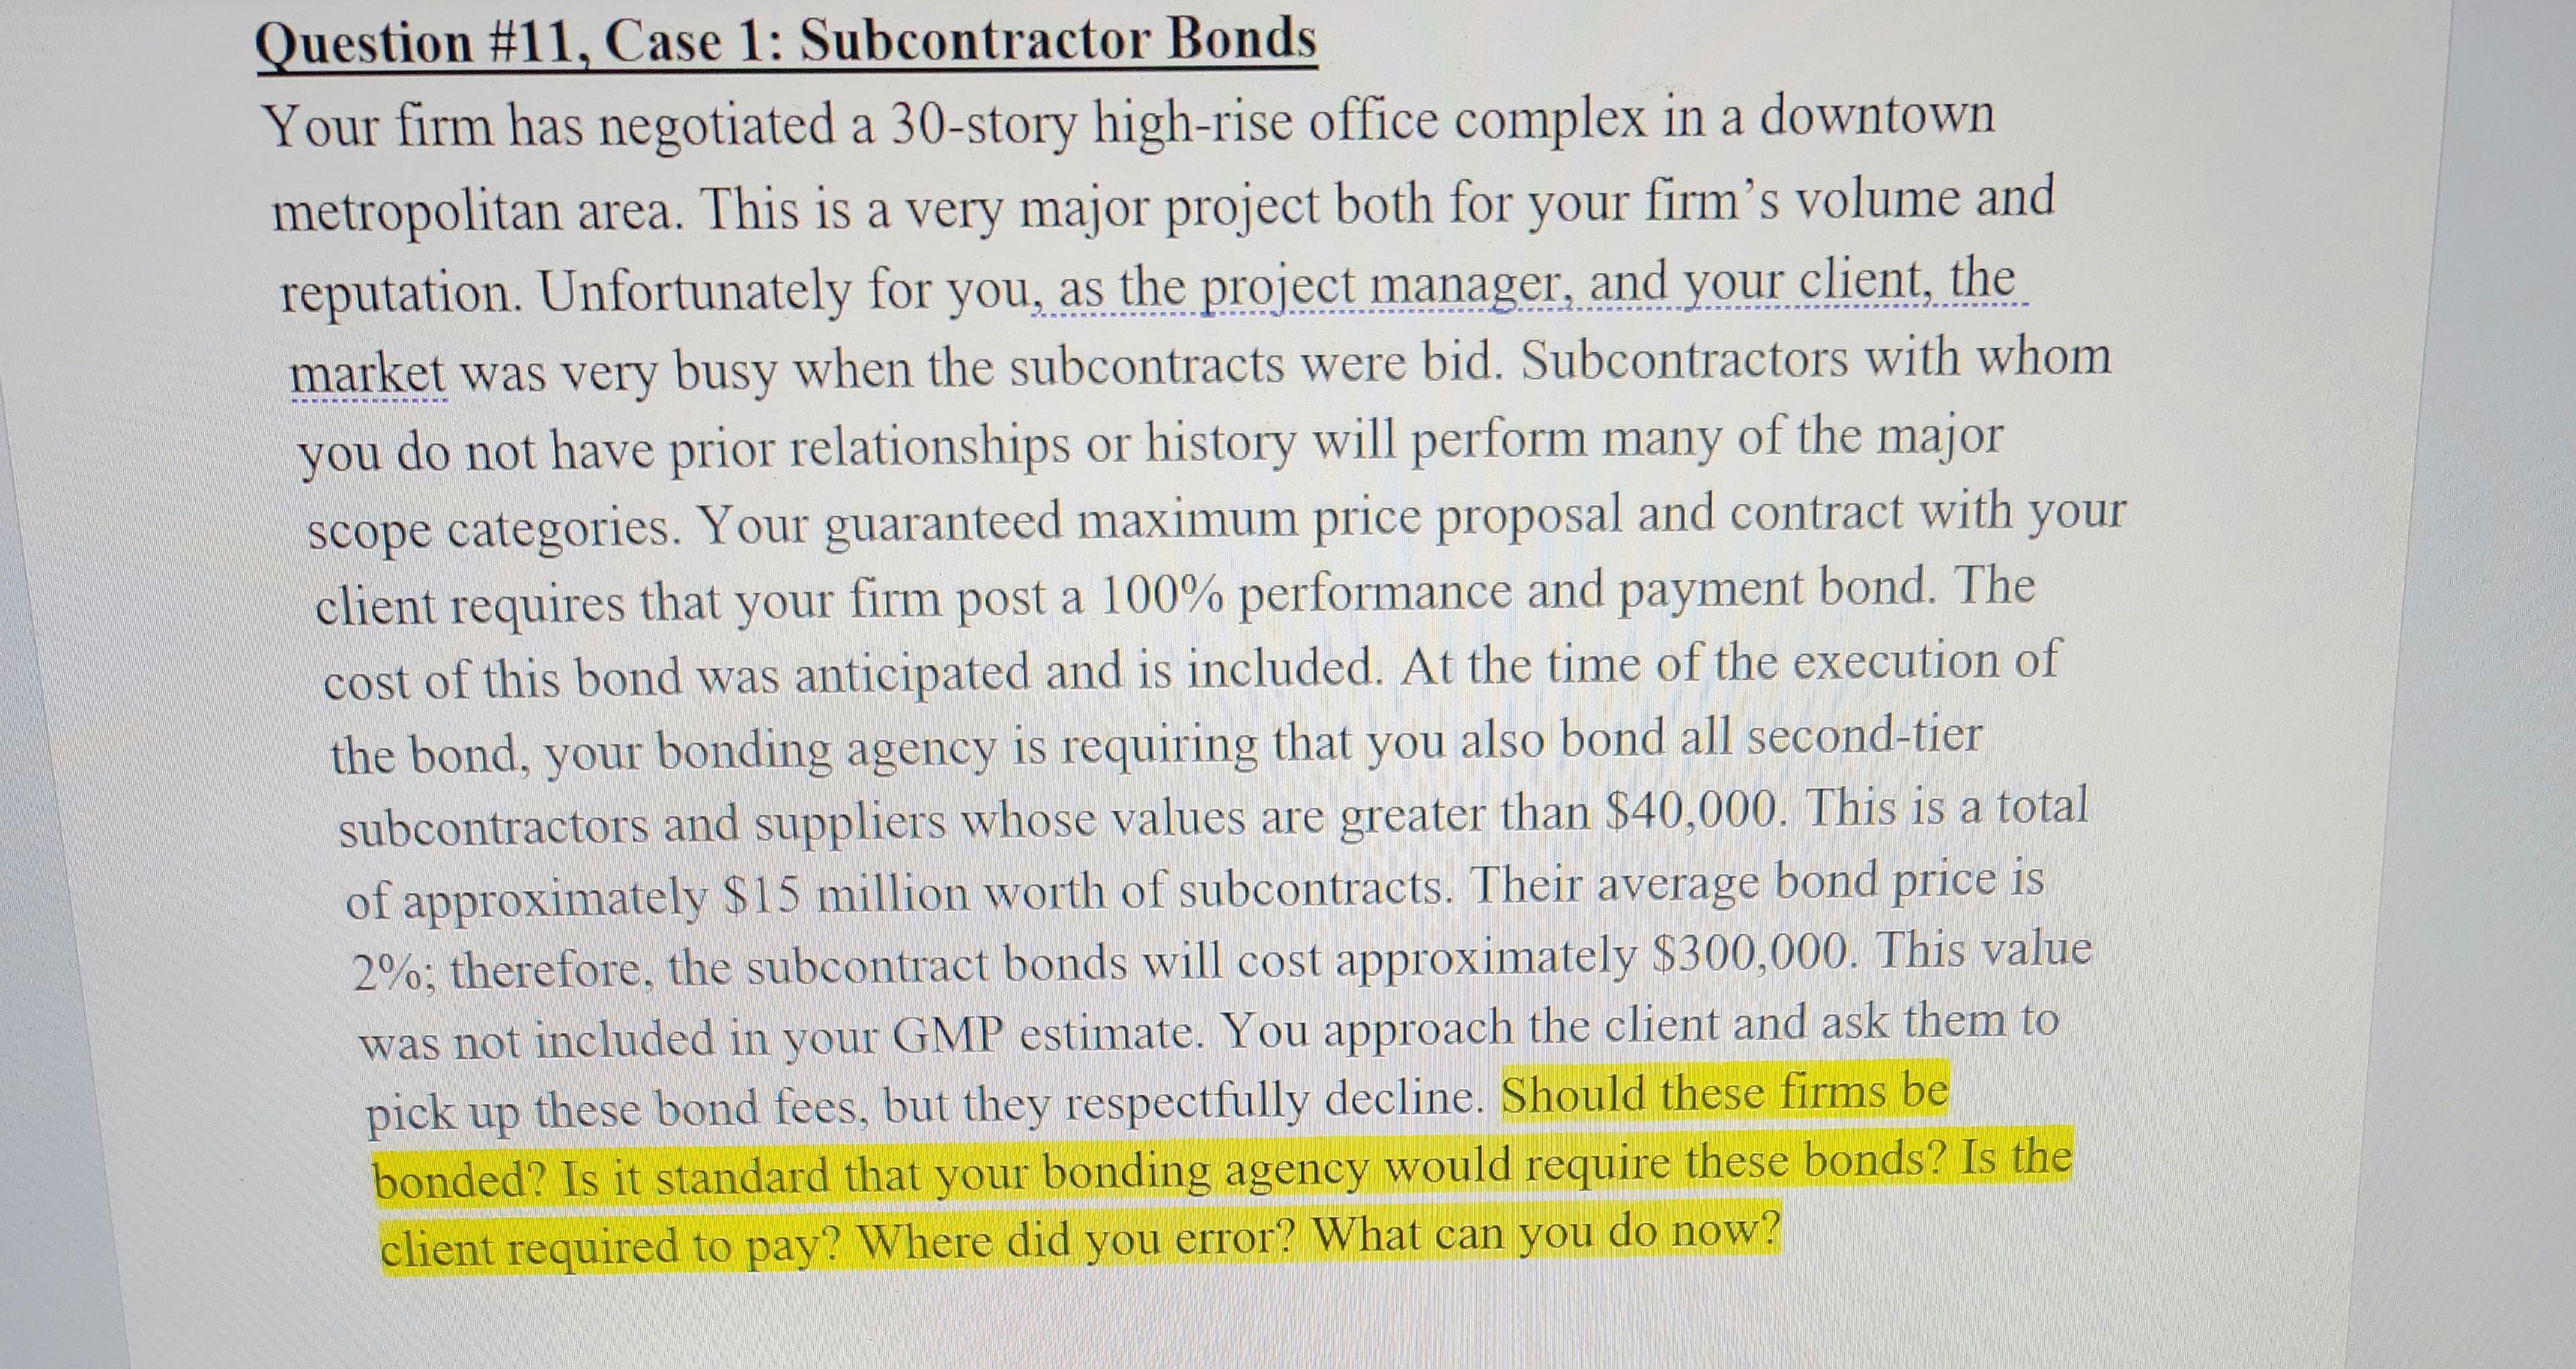 Question #11, Case 1: Subcontractor Bonds
Your firm has negotiated a 30-story high-rise office complex in a downtown
metropolitan area. This is a very major project both for your firm's volume and
reputation. Unfortunately for you, as the project manager, and your client, the
market was very busy when the subcontracts were bid. Subcontractors with whom
you do not have prior relationships or history will perform many of the major
scope categories. Your guaranteed maximum price proposal and contract with your
client requires that your firm post a 100% performance and payment bond. The
cost of this bond was anticipated and is included. At the time of the execution of
the bond, your bonding agency is requiring that you also bond all second-tier
subcontractors and suppliers whose values are greater than $40,000. This is a total
of approximately $15 million worth of subcontracts. Their average bond price is
2%; therefore, the subcontract bonds will cost approximately $300,000. This value
was not included in your GMP estimate. You approach the client and ask them to
pick up these bond fees, but they respectfully decline. Should these firms be
bonded? Is it standard that your bonding agency would require these bonds? Is the
client required to pay? Where did you error? What can you do now?